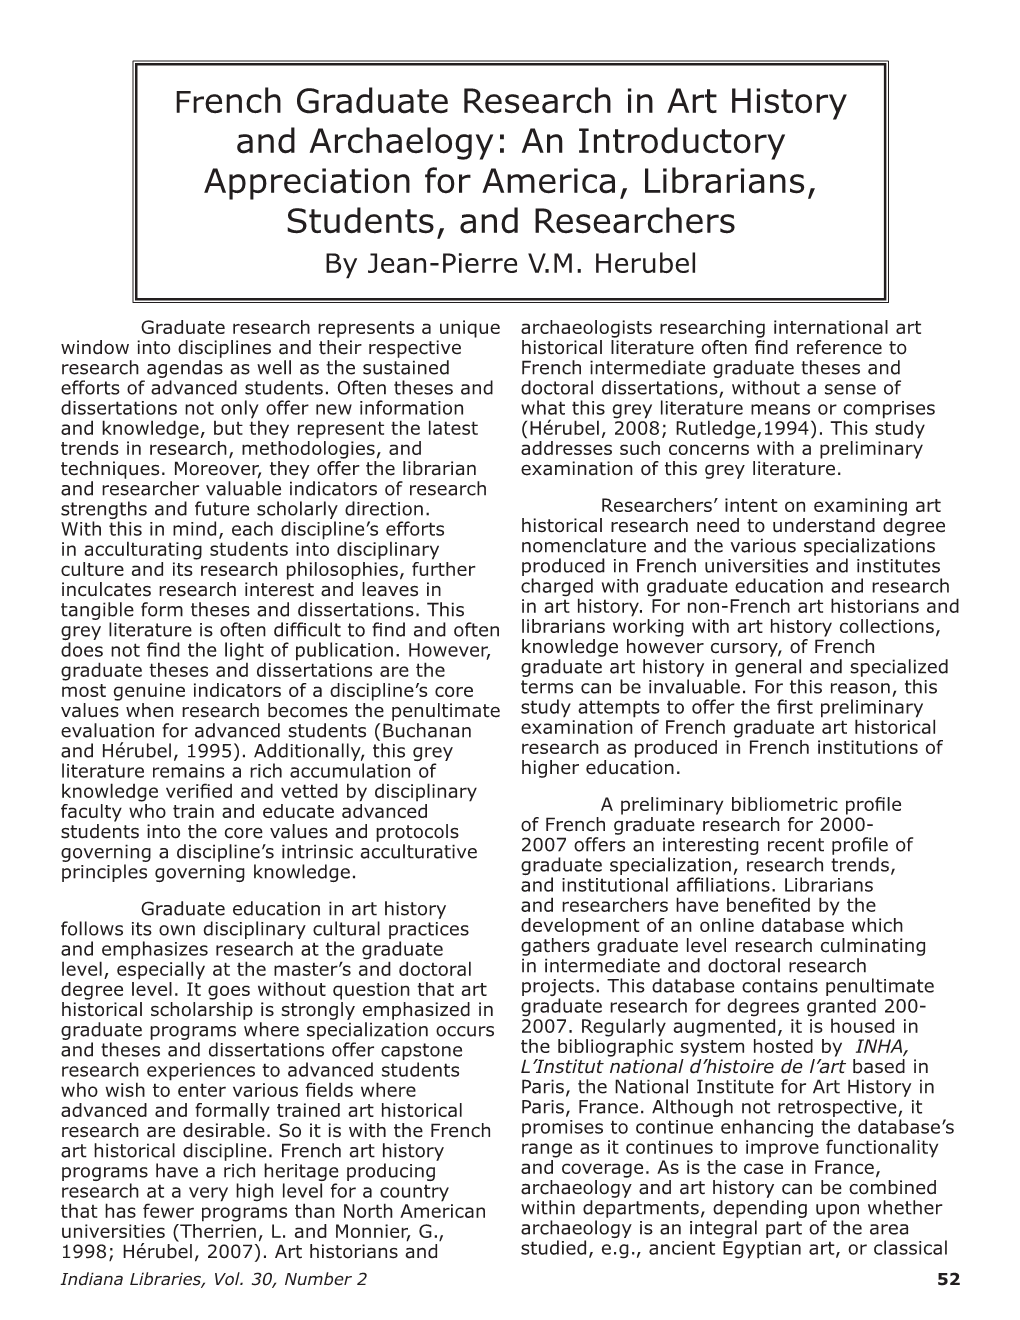 French Graduate Research in Art History and Archaelogy: an Introductory Appreciation for America, Librarians, Students, and Researchers by Jean-Pierre V.M